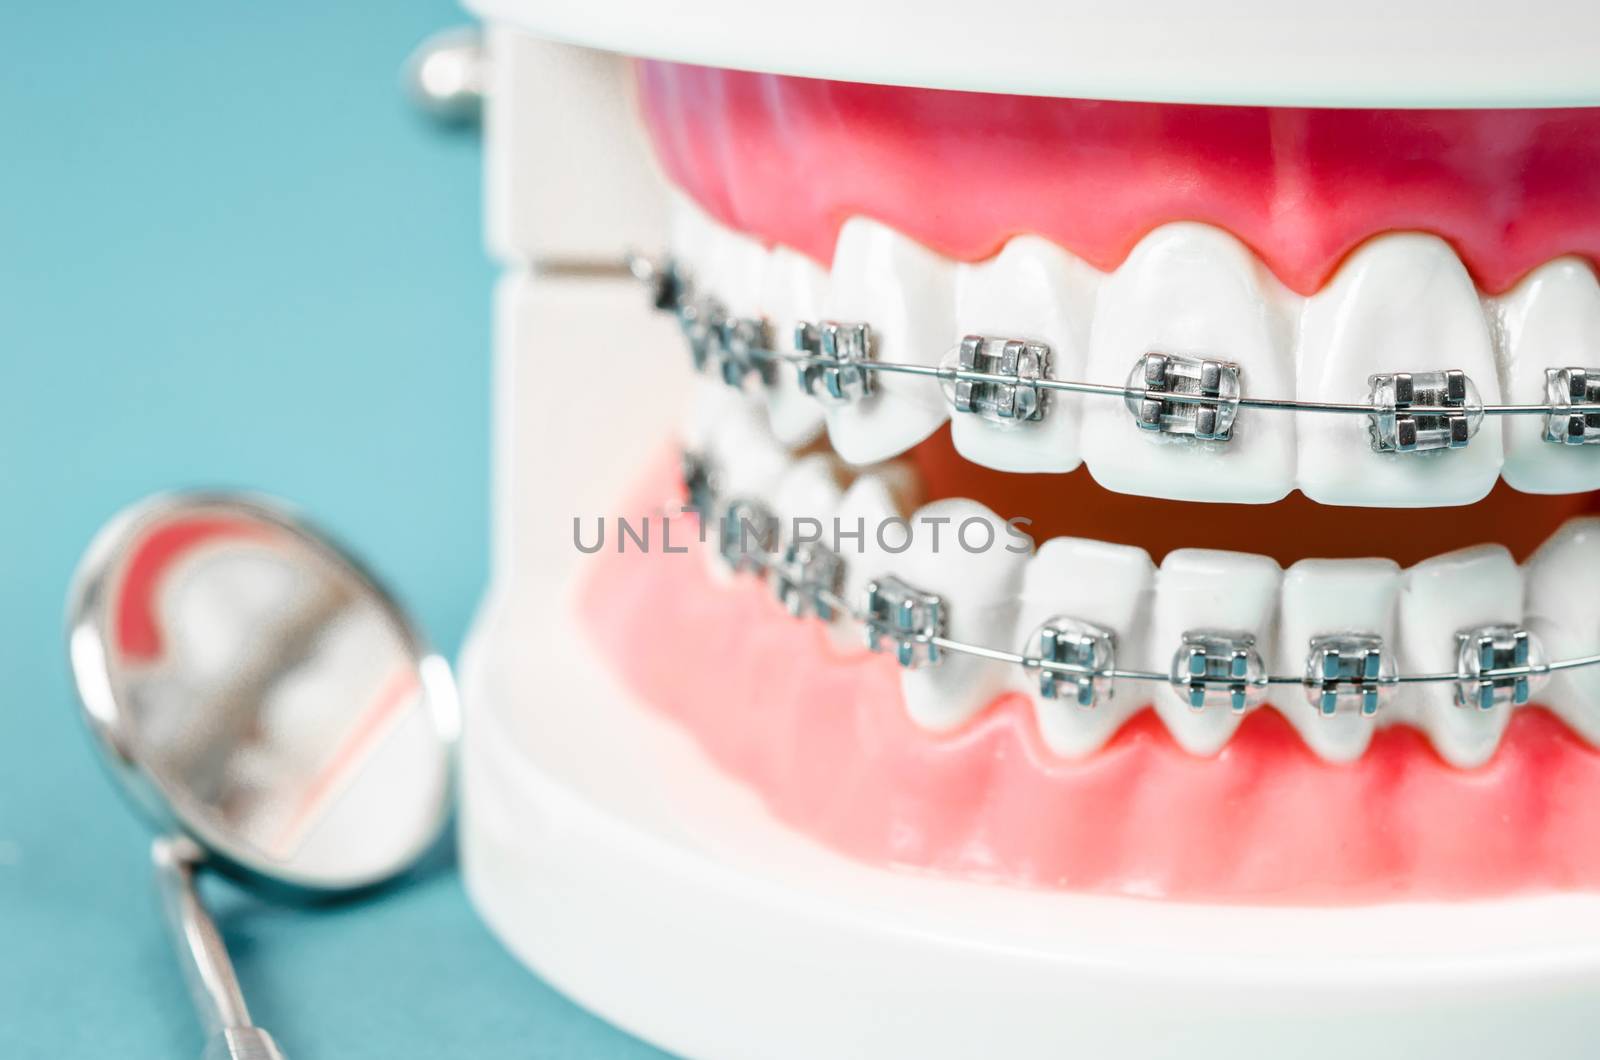 tooth model with metal wire dental braces and mirror dental equipment on blue background.